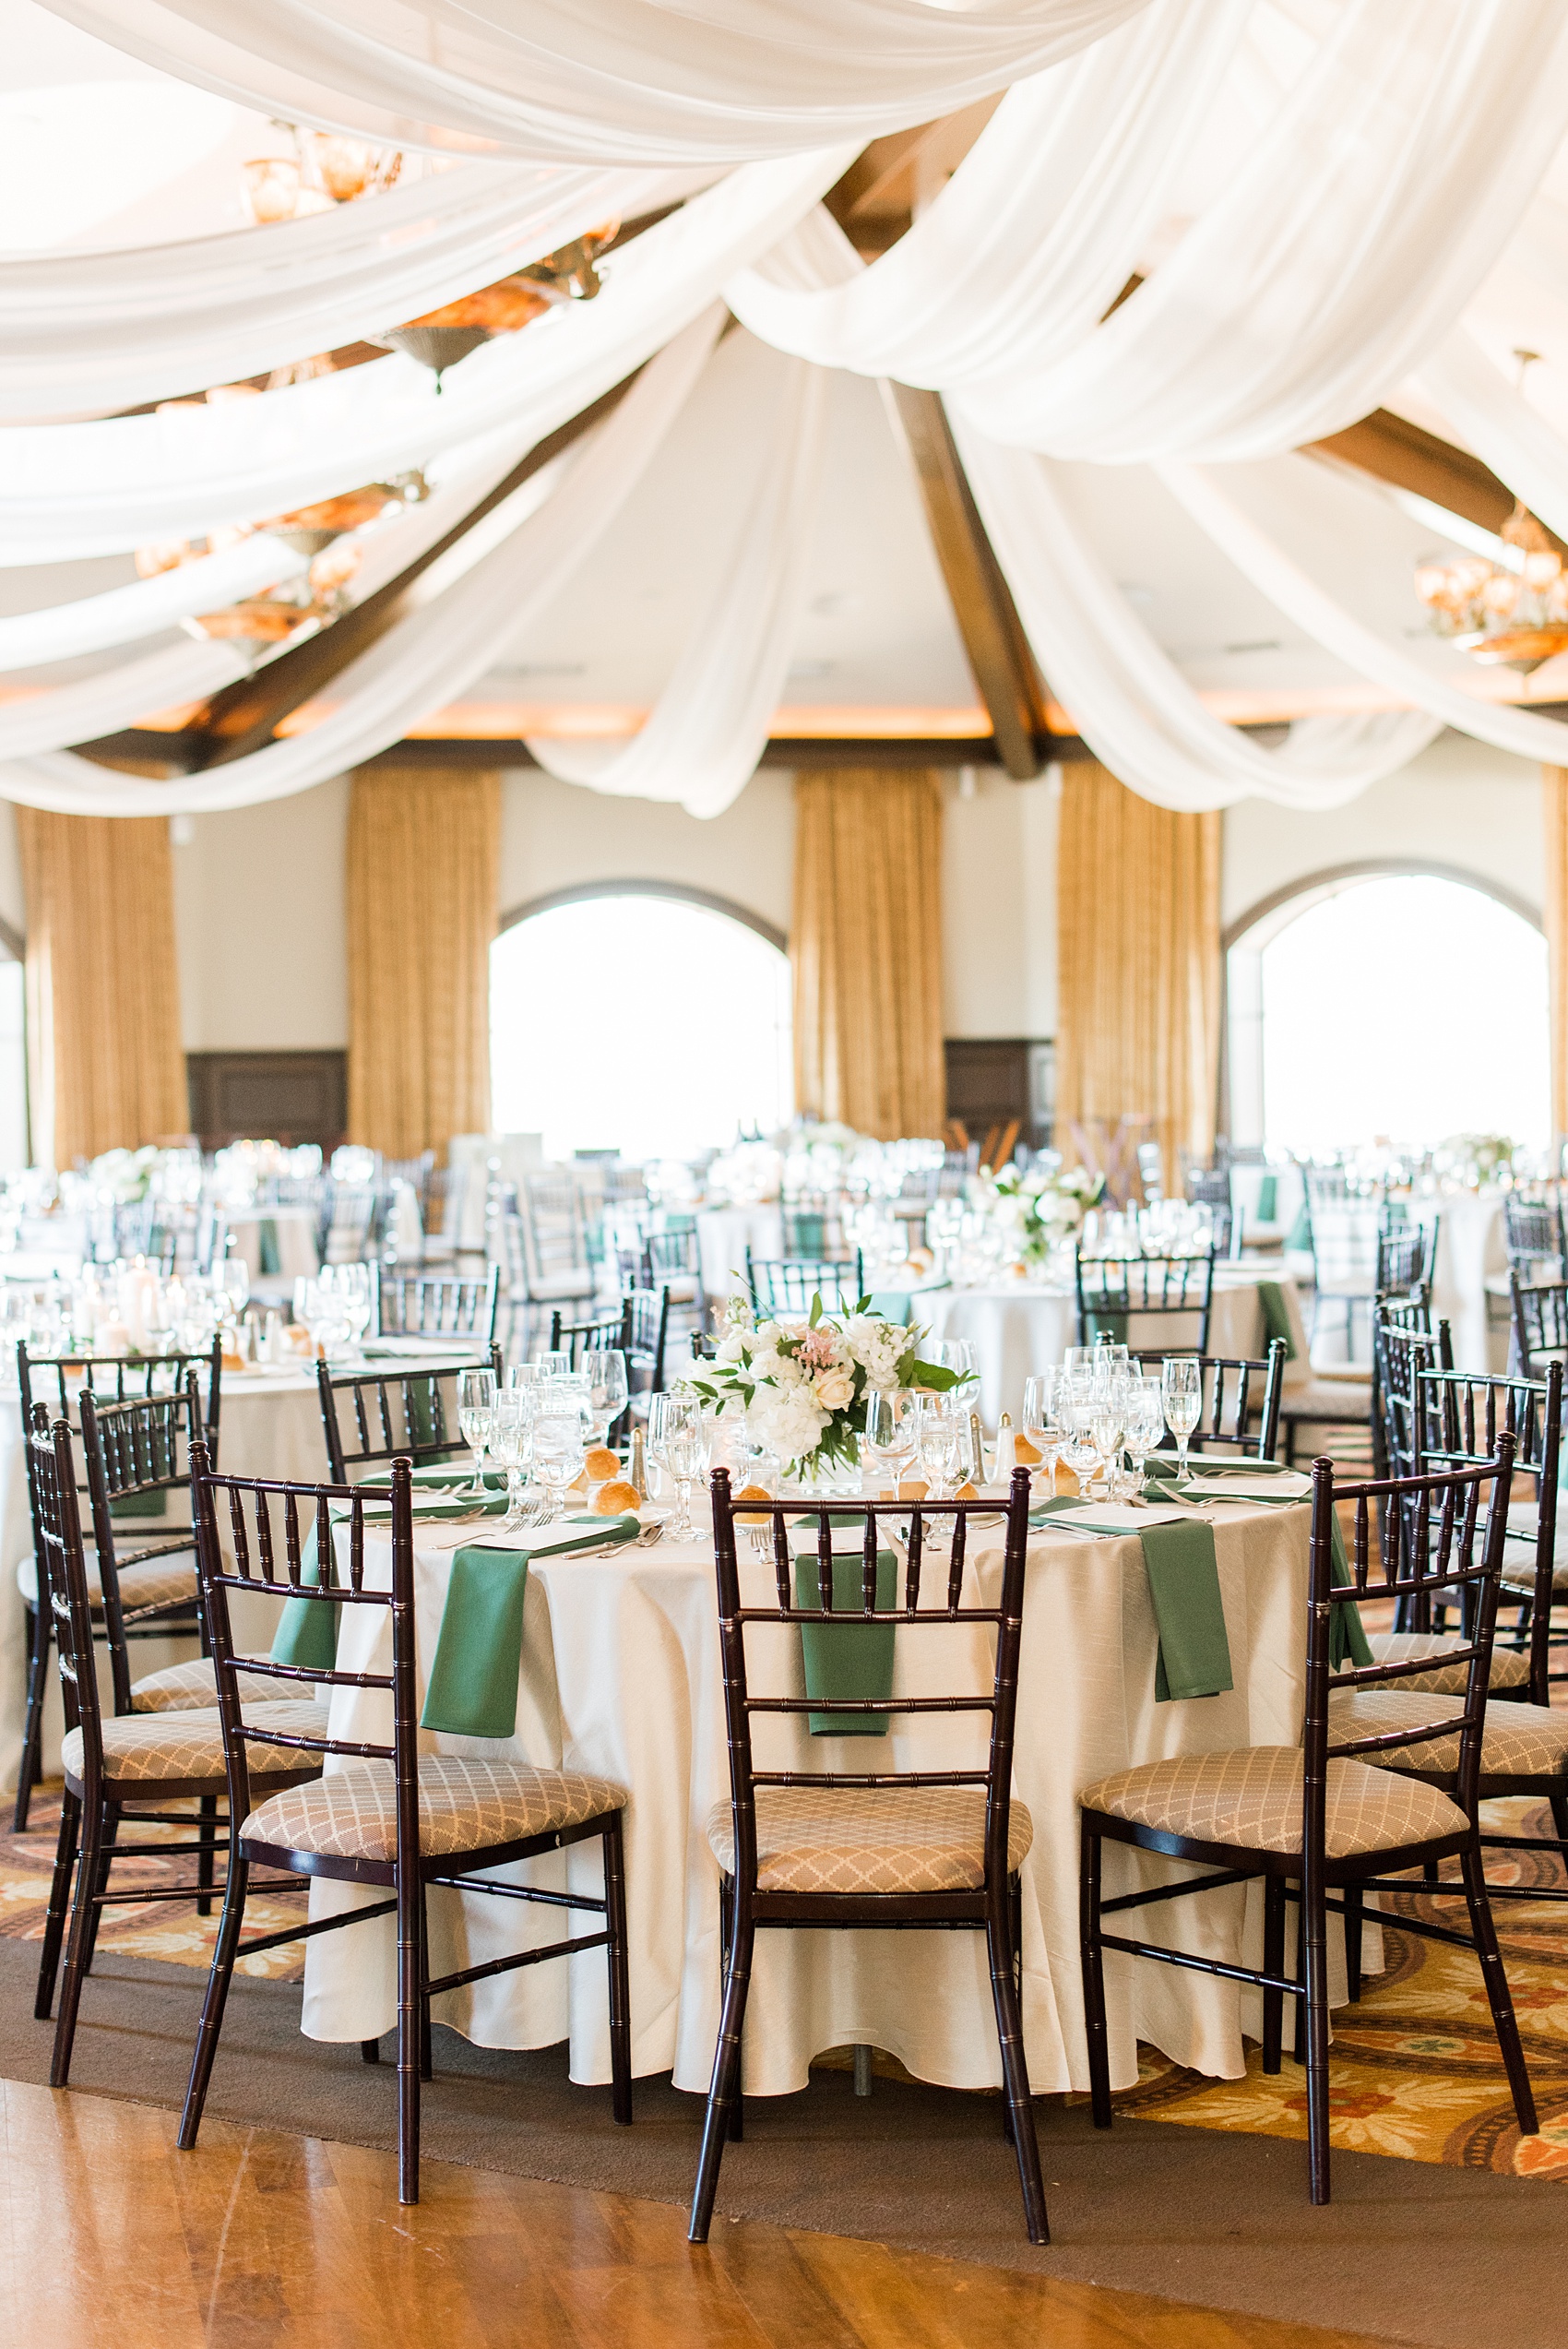 Saratoga Springs destination wedding photos by Mikkel Paige Photography. The spring event was held at Saratoga National Golf Club venue for a spring celebration. The reception room was decorated with custom white draping, and green and gold color palette elements. #SaratogaSpringsNY #SaratogaSprings #mikkelpaige #NYwedding #destinationwedding #saratogaweddingvenue #golfcoursewedding #customdraping #springwedding